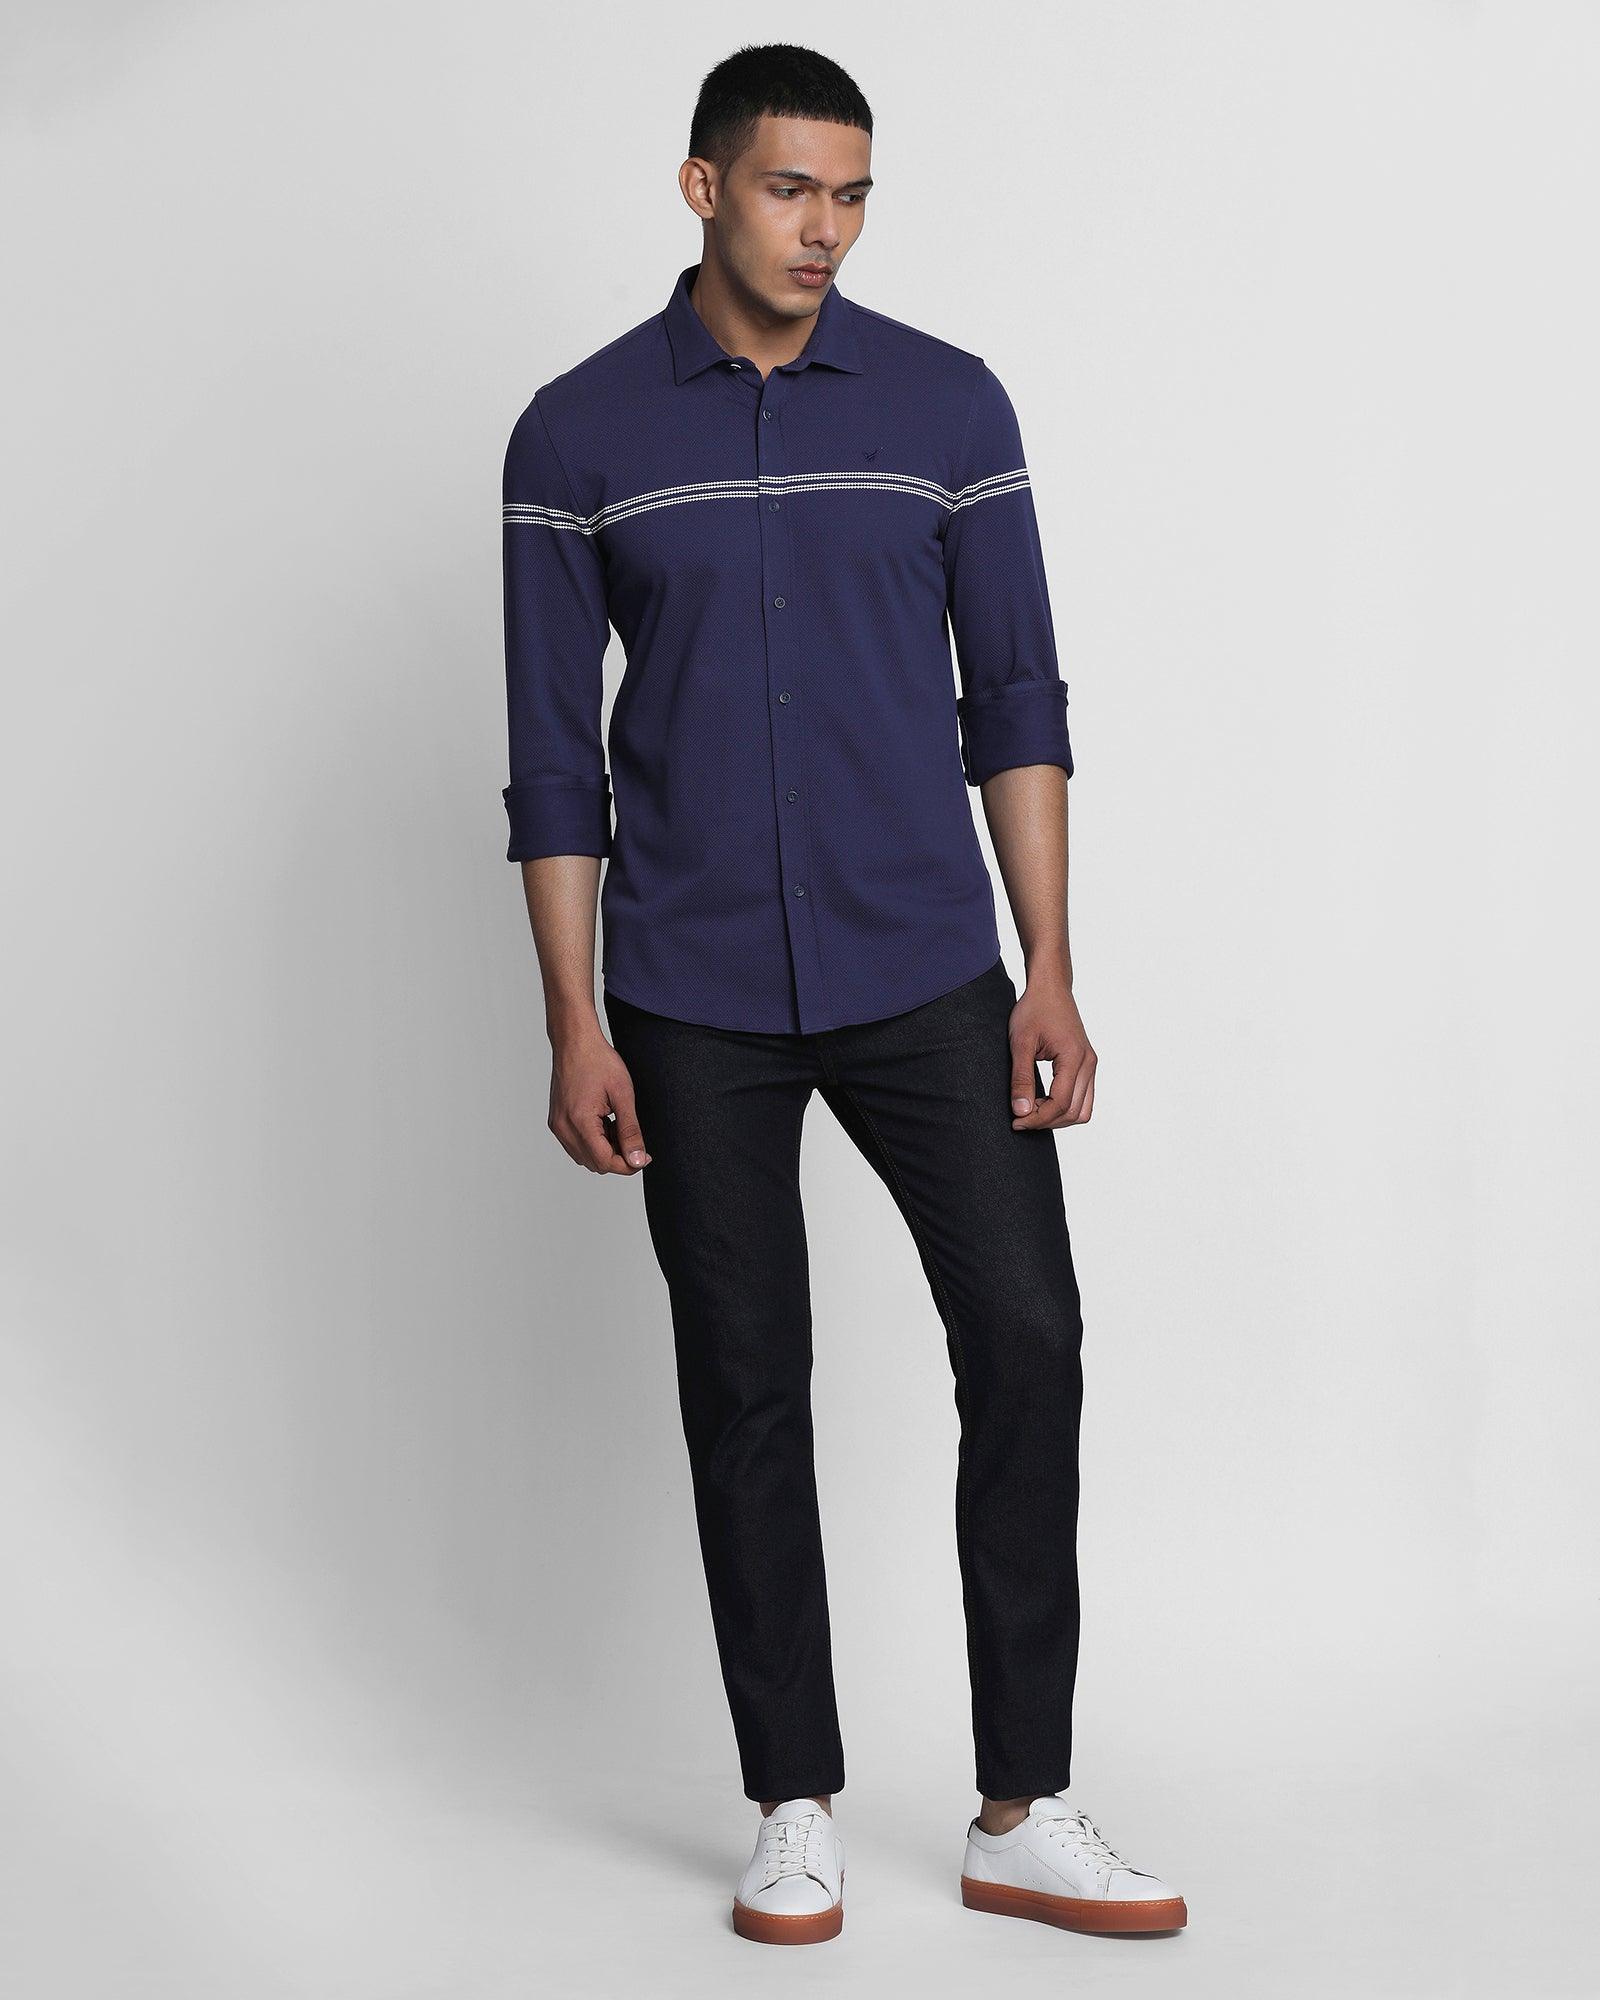 SELECTED HOMME Casual Shirts : Buy SELECTED HOMME Navy Blue Full Sleeves  Shirt Online|Nykaa fashion